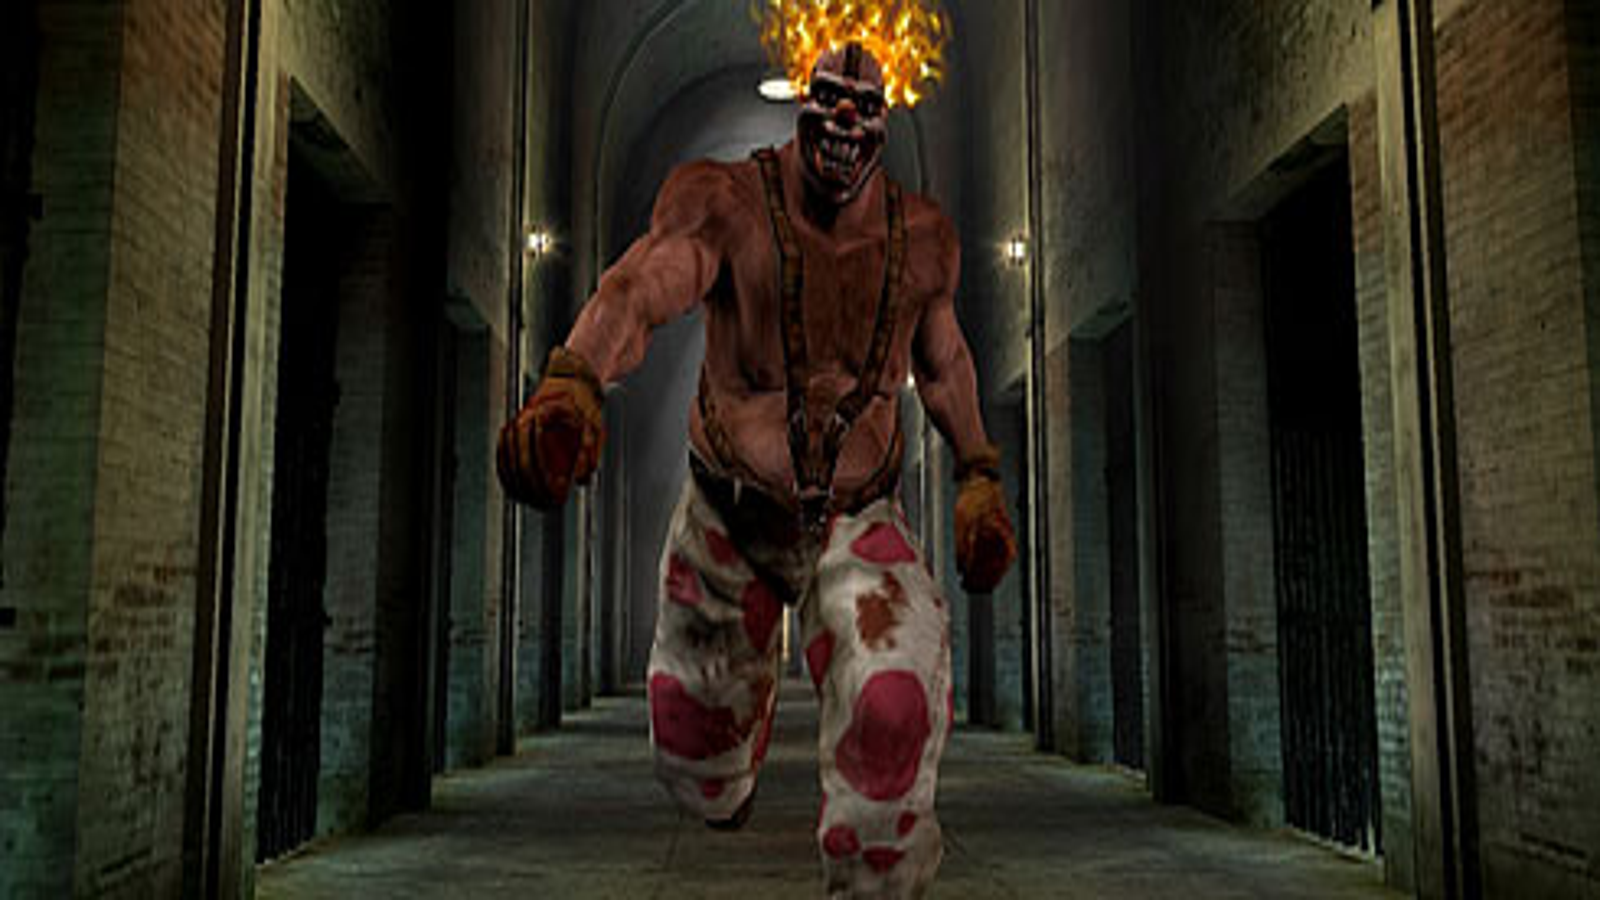 Will We Ever Get A New Twisted Metal Game?